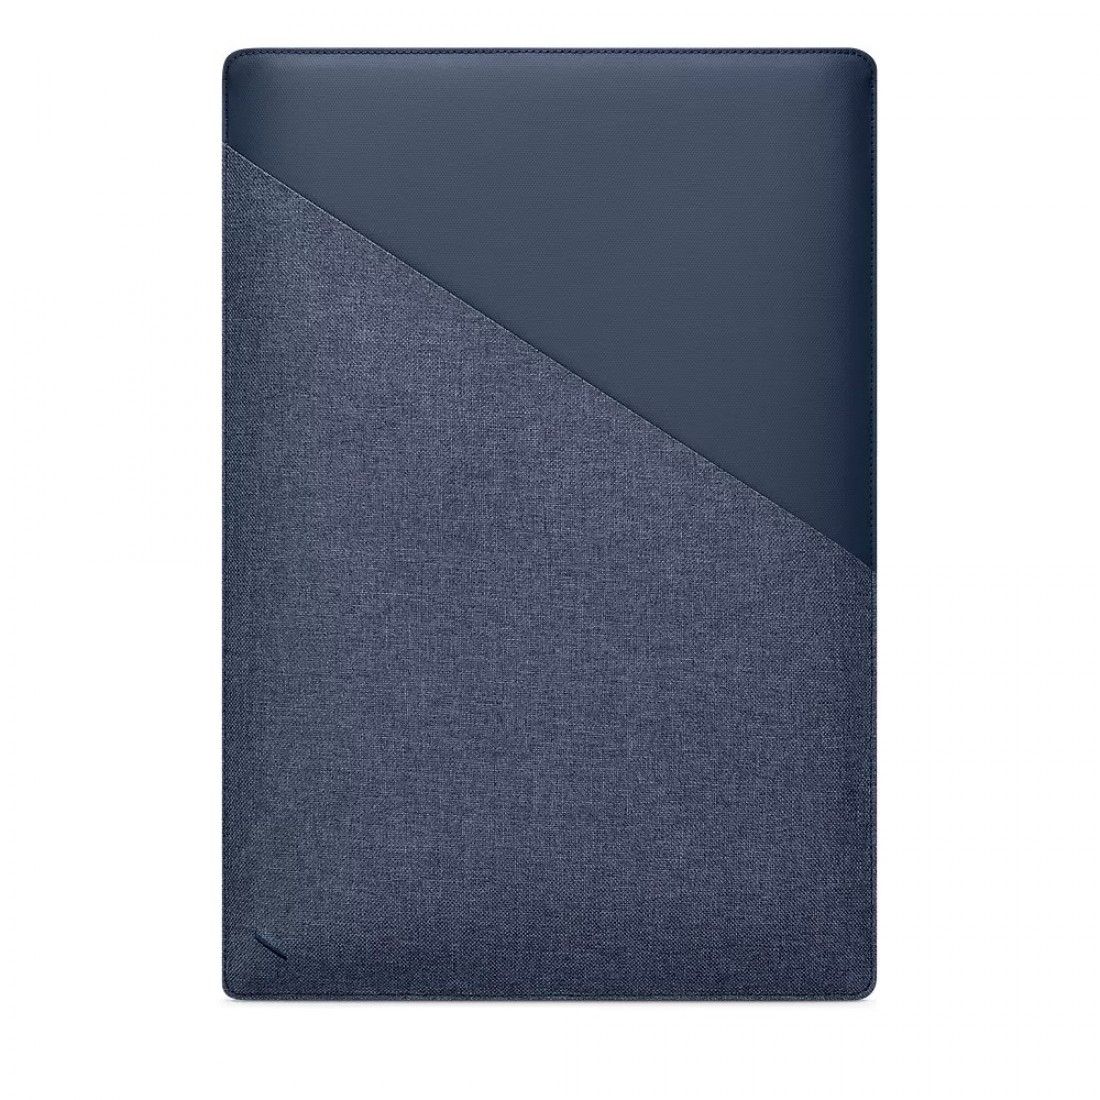 Native Union Stow Slim Sleeve Case Indigo for MacBook Pro 15"/16" (STOW-MBS-IND-FB-16)